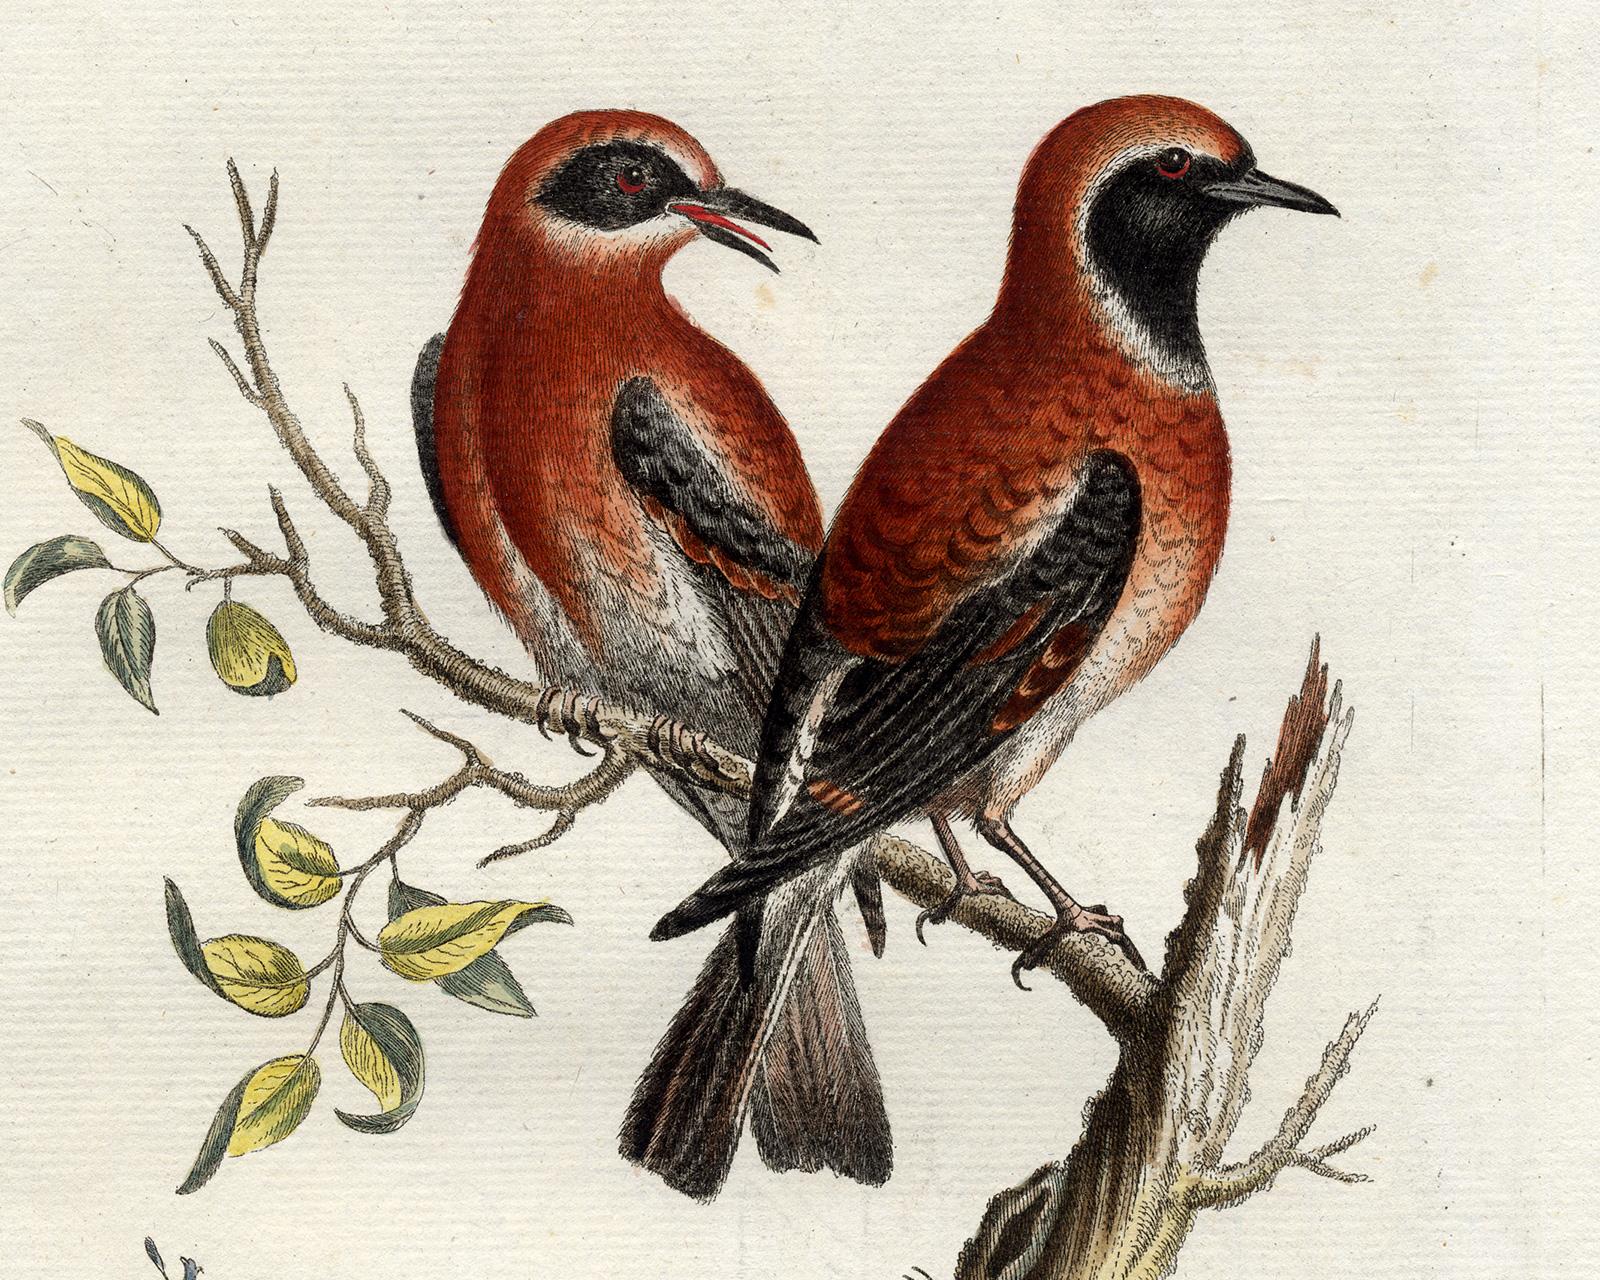 Red Warbler by Seligmann - Handcoloured etching - 18th century - Old Masters Print by Johann Michael Seligmann